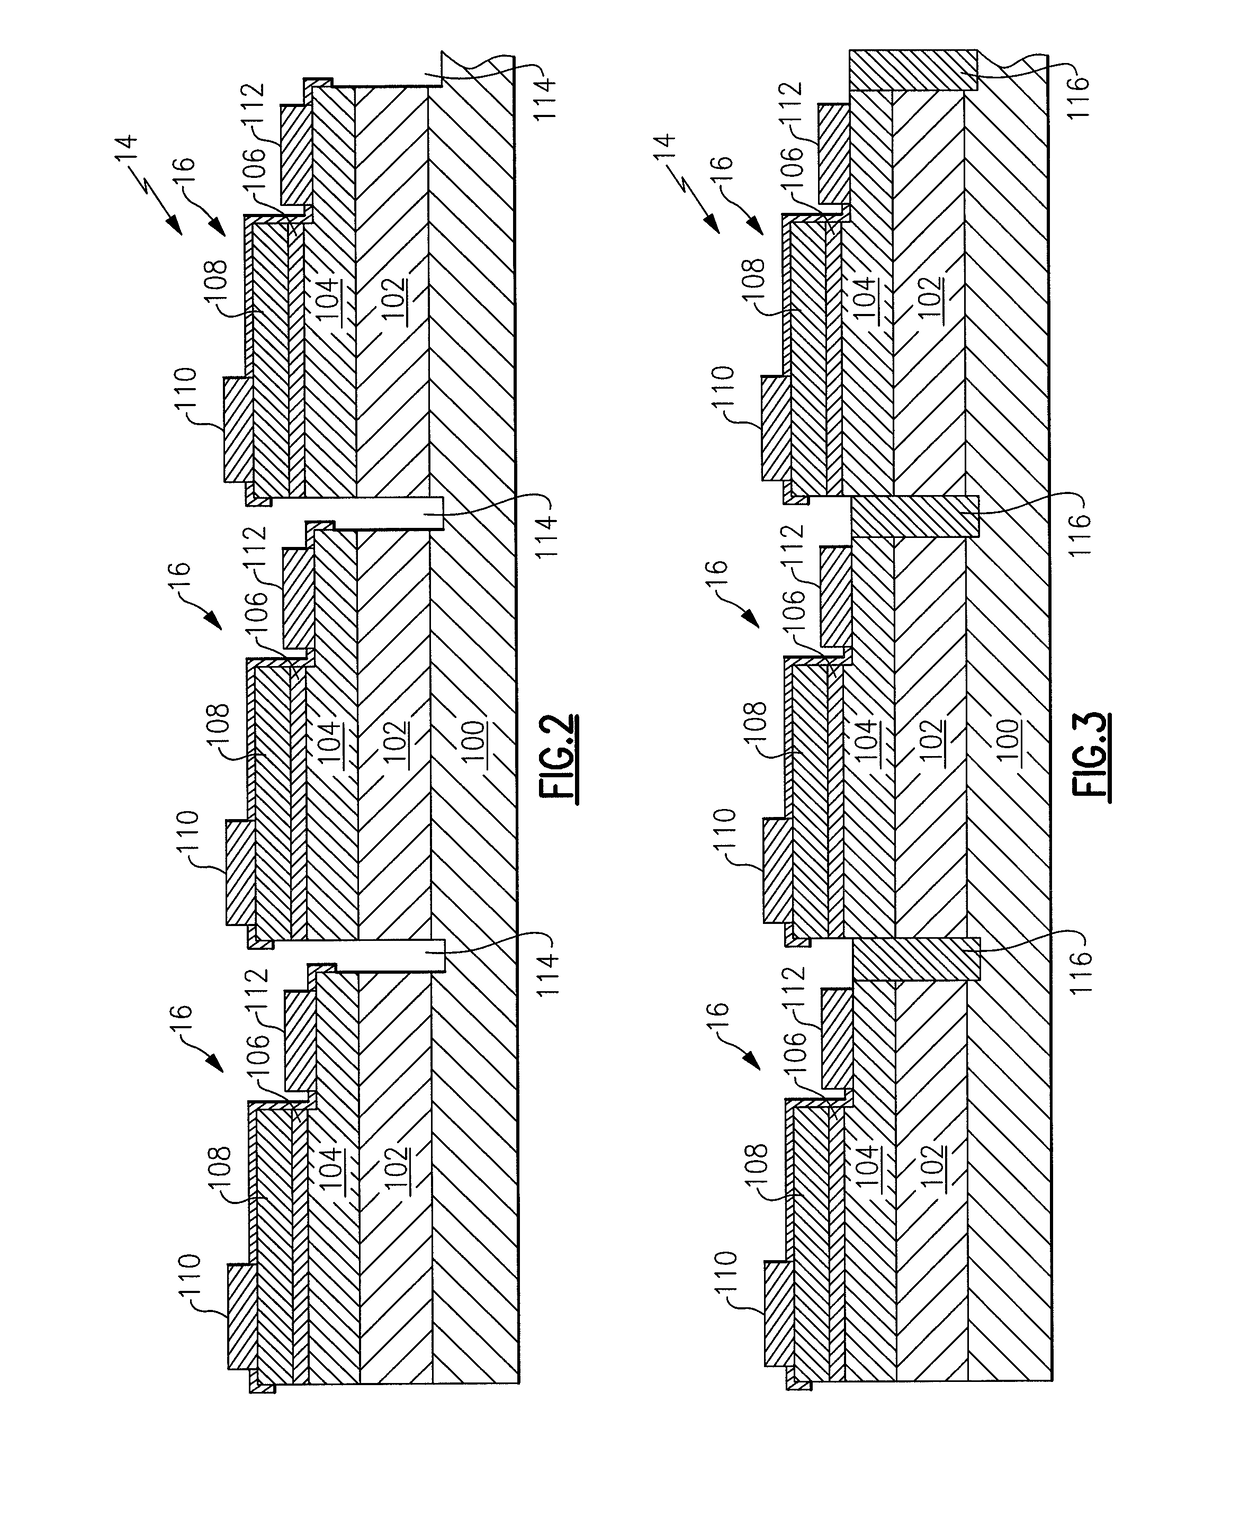 Illumination devices, and methods of fabricating same